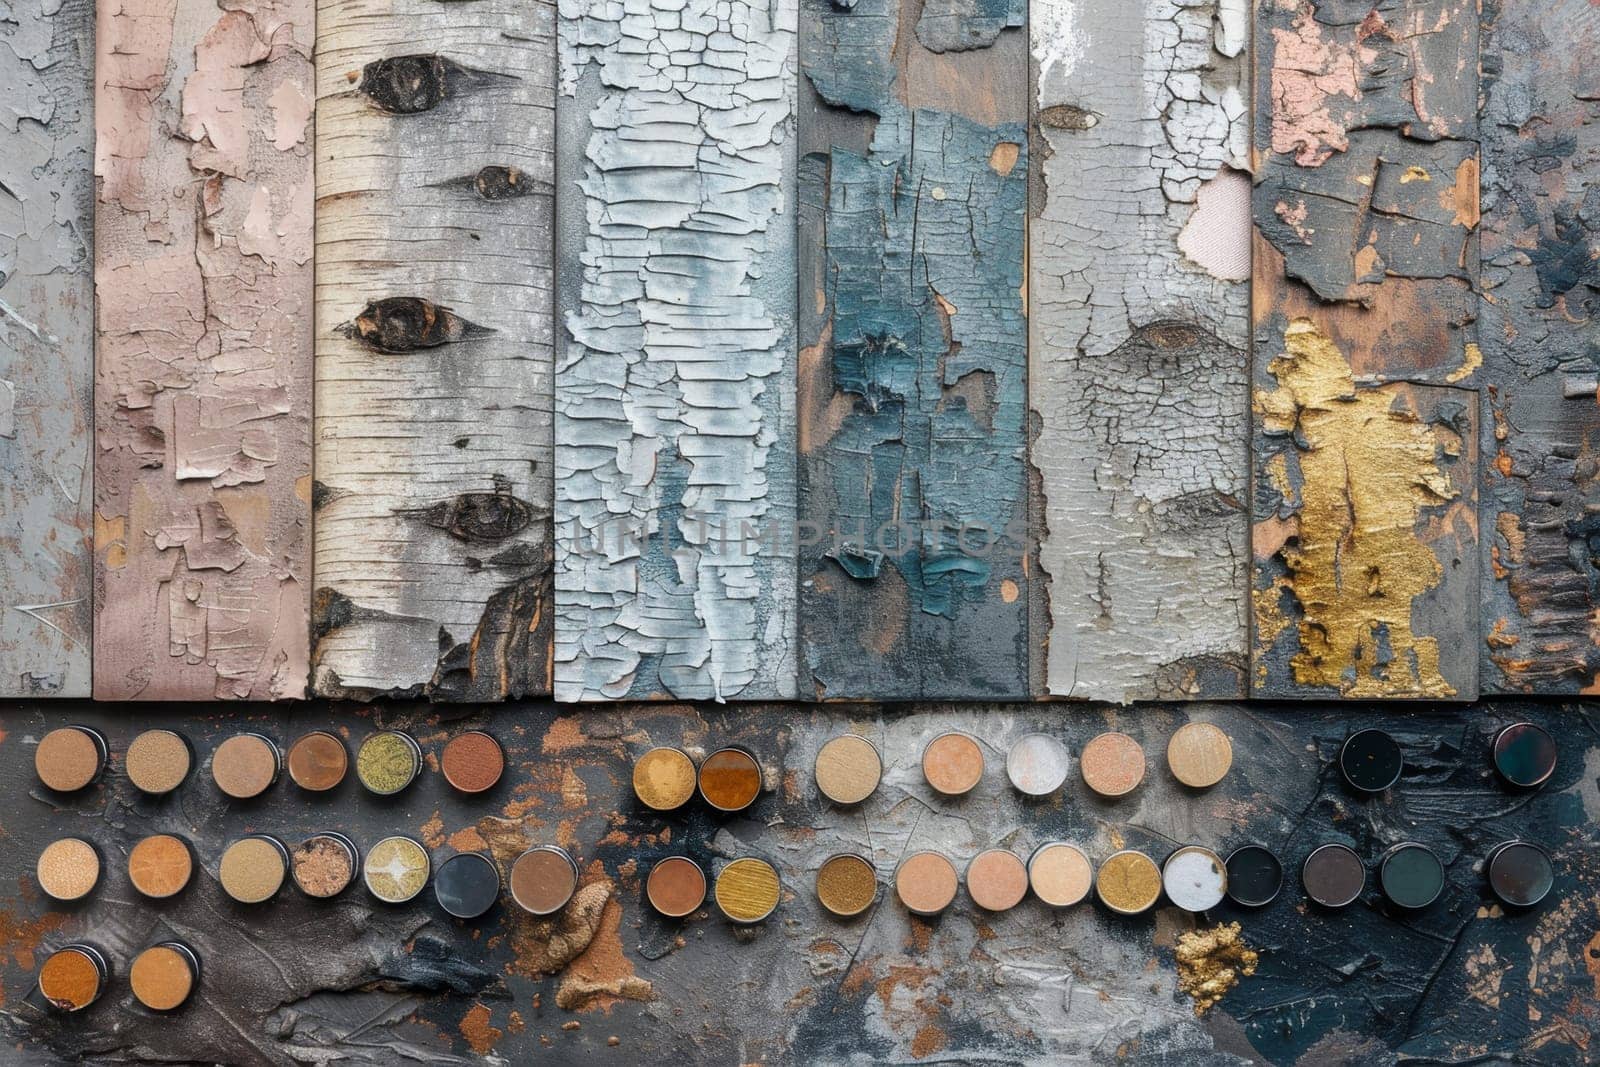 multicolored abstract background with a grunge-style bark texture. Bark background by Lobachad